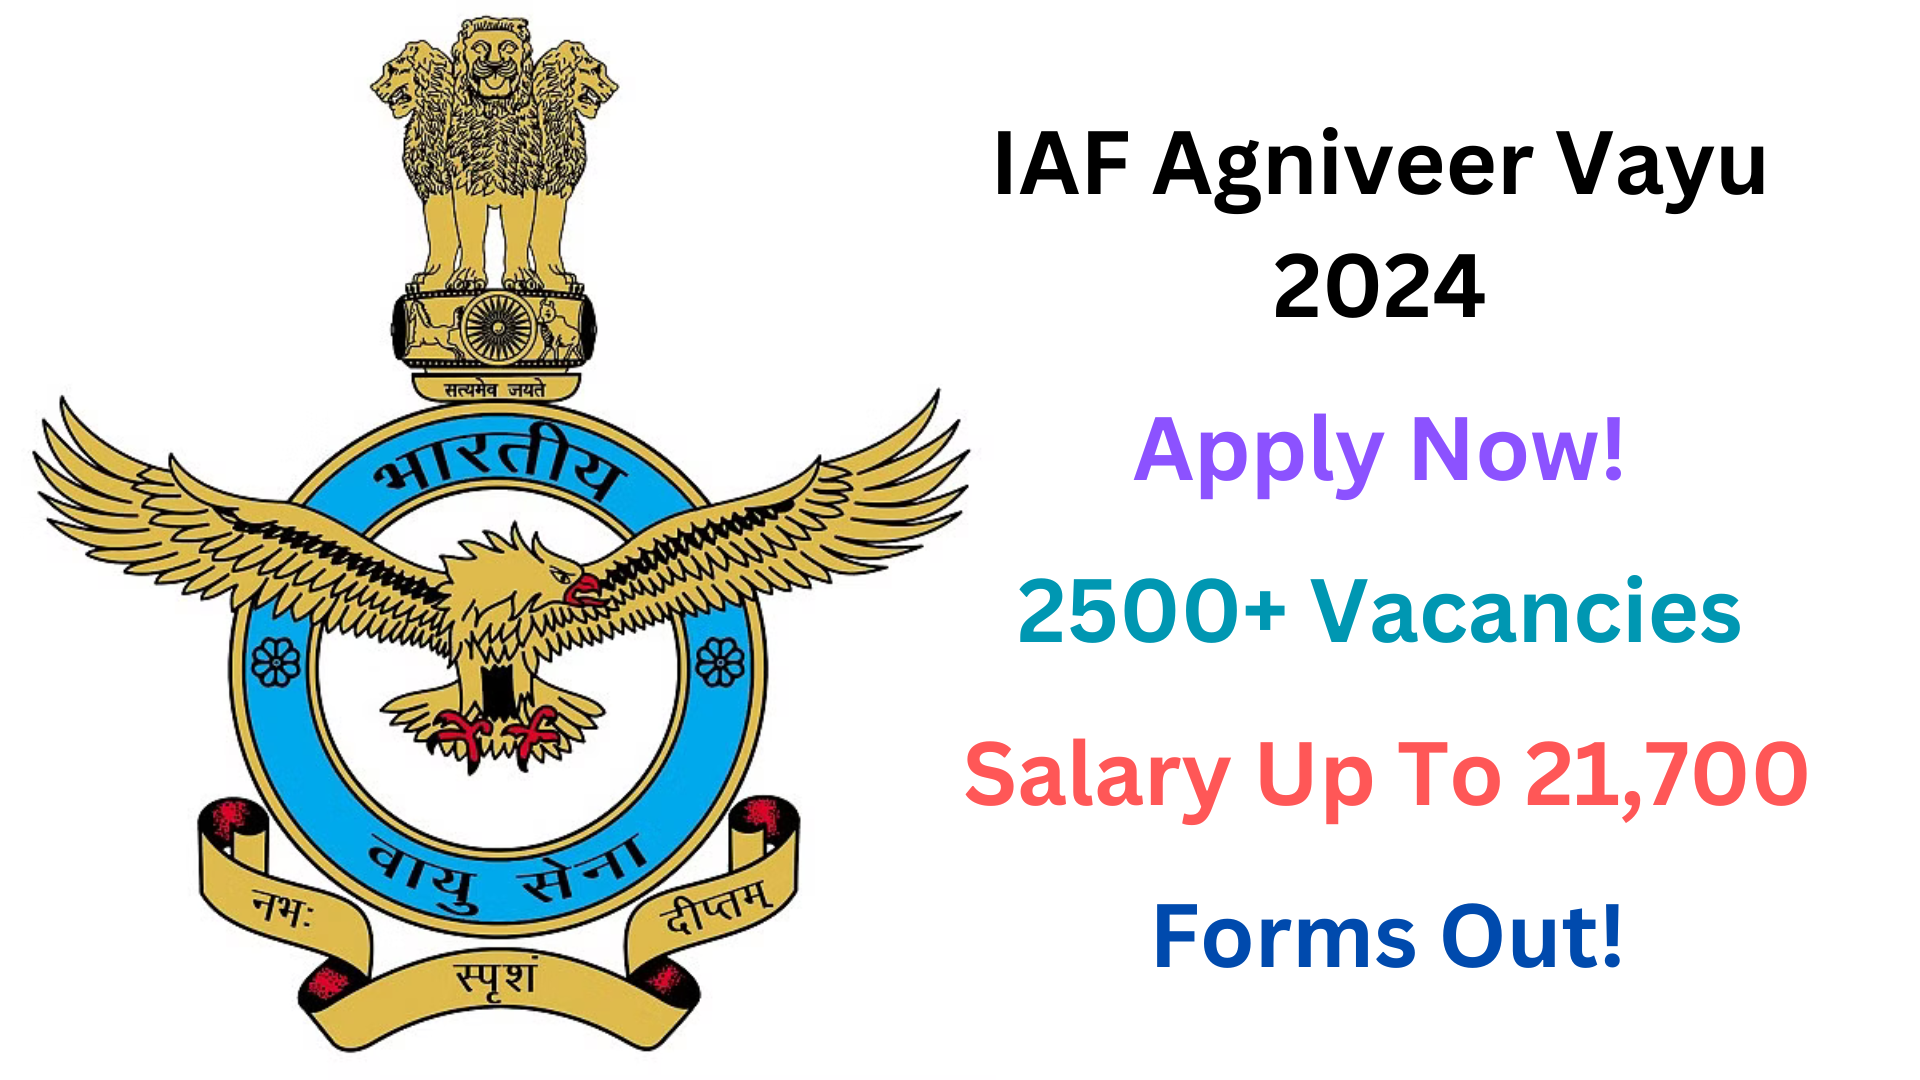 IAF Agniveer Vayu Recruitment Online Form 2024, Apply Now, Check Latest Vacancy Details, Eligibility Criteria, and More